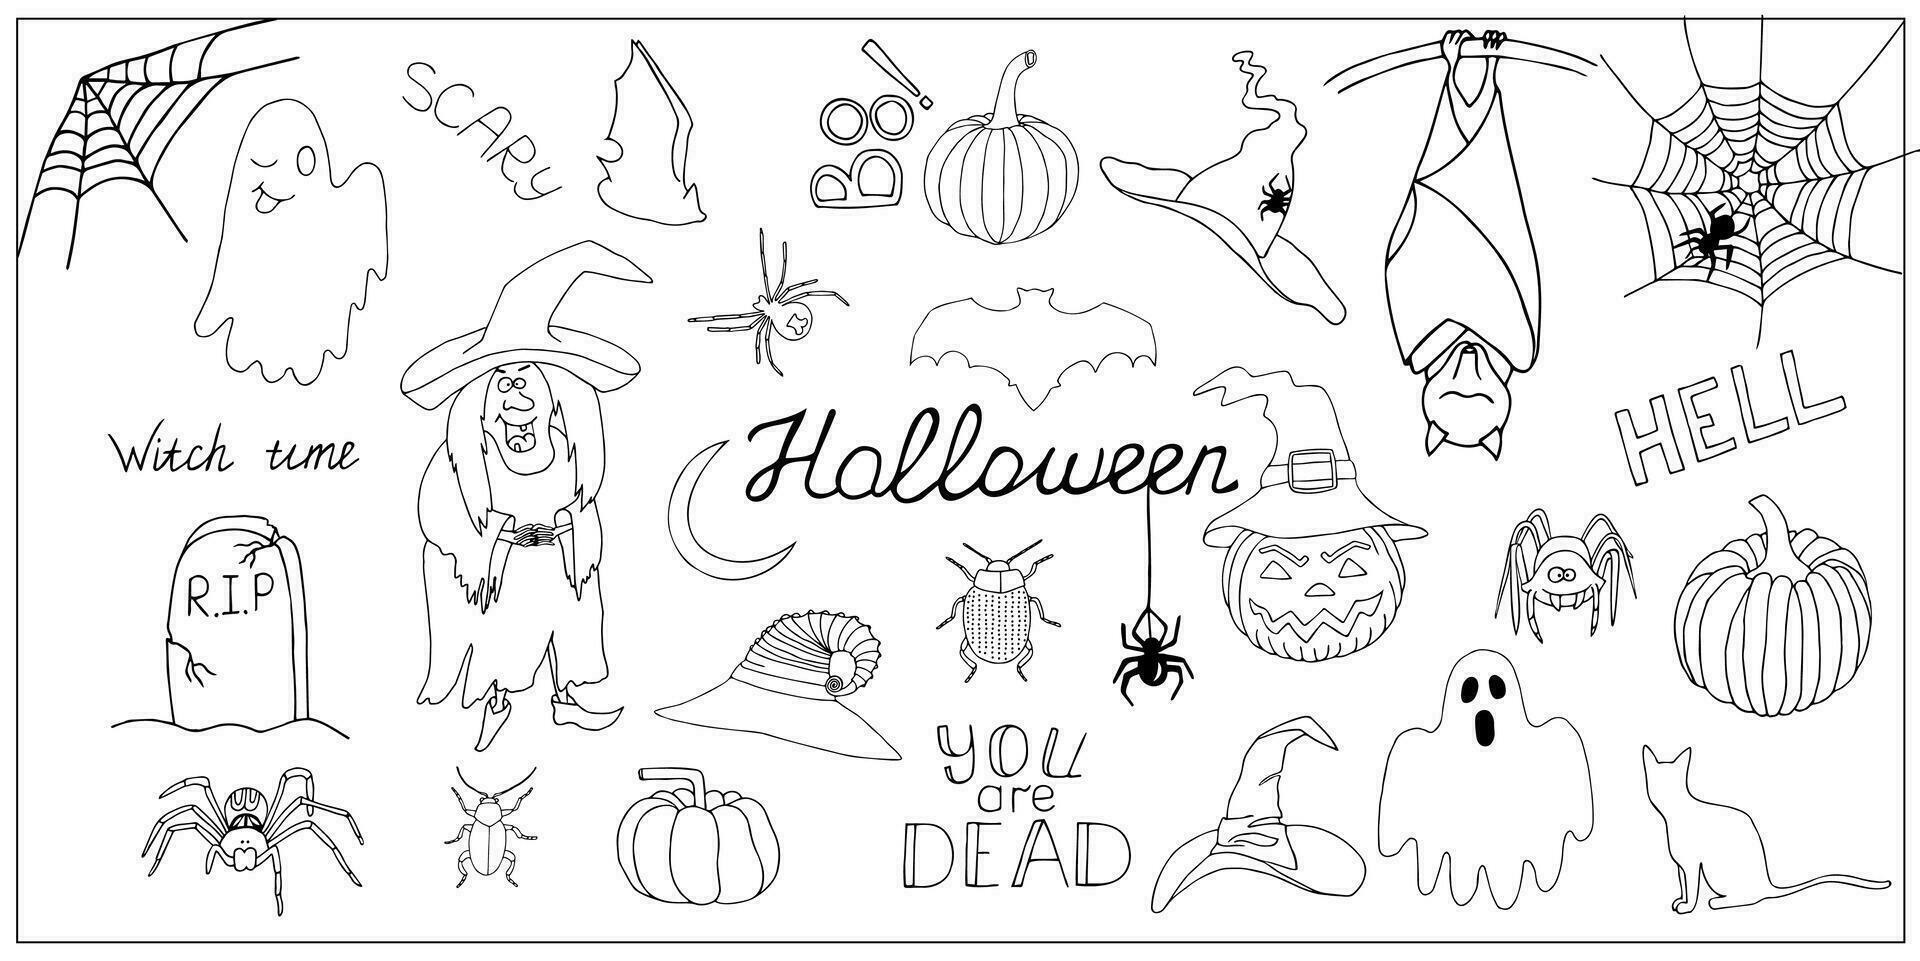 Vector set of Halloween doodle. Funny and scary Halloween decorations for postcards, playrooms. Hand drawn Halloween icons. Witch, ghost, spider web, pumpkin, tomb, bat stickers.